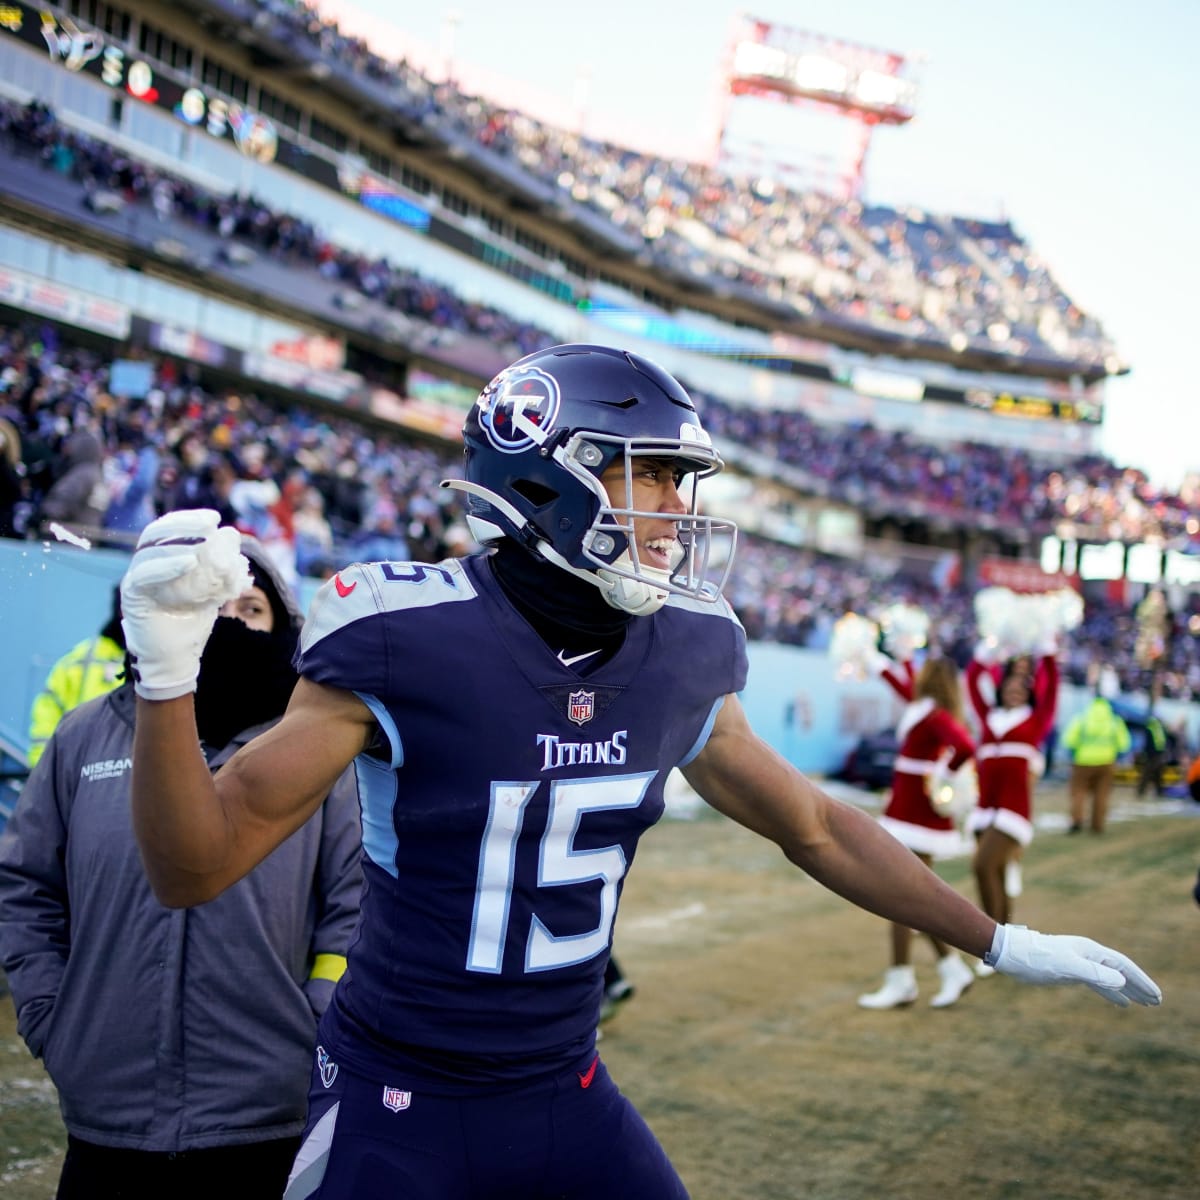 Former Indiana Hoosiers Wide Receiver Nick Westbrook-Ikhine Scores His  First NFL Touchdown for the Tennessee Titans - Sports Illustrated Indiana  Hoosiers News, Analysis and More